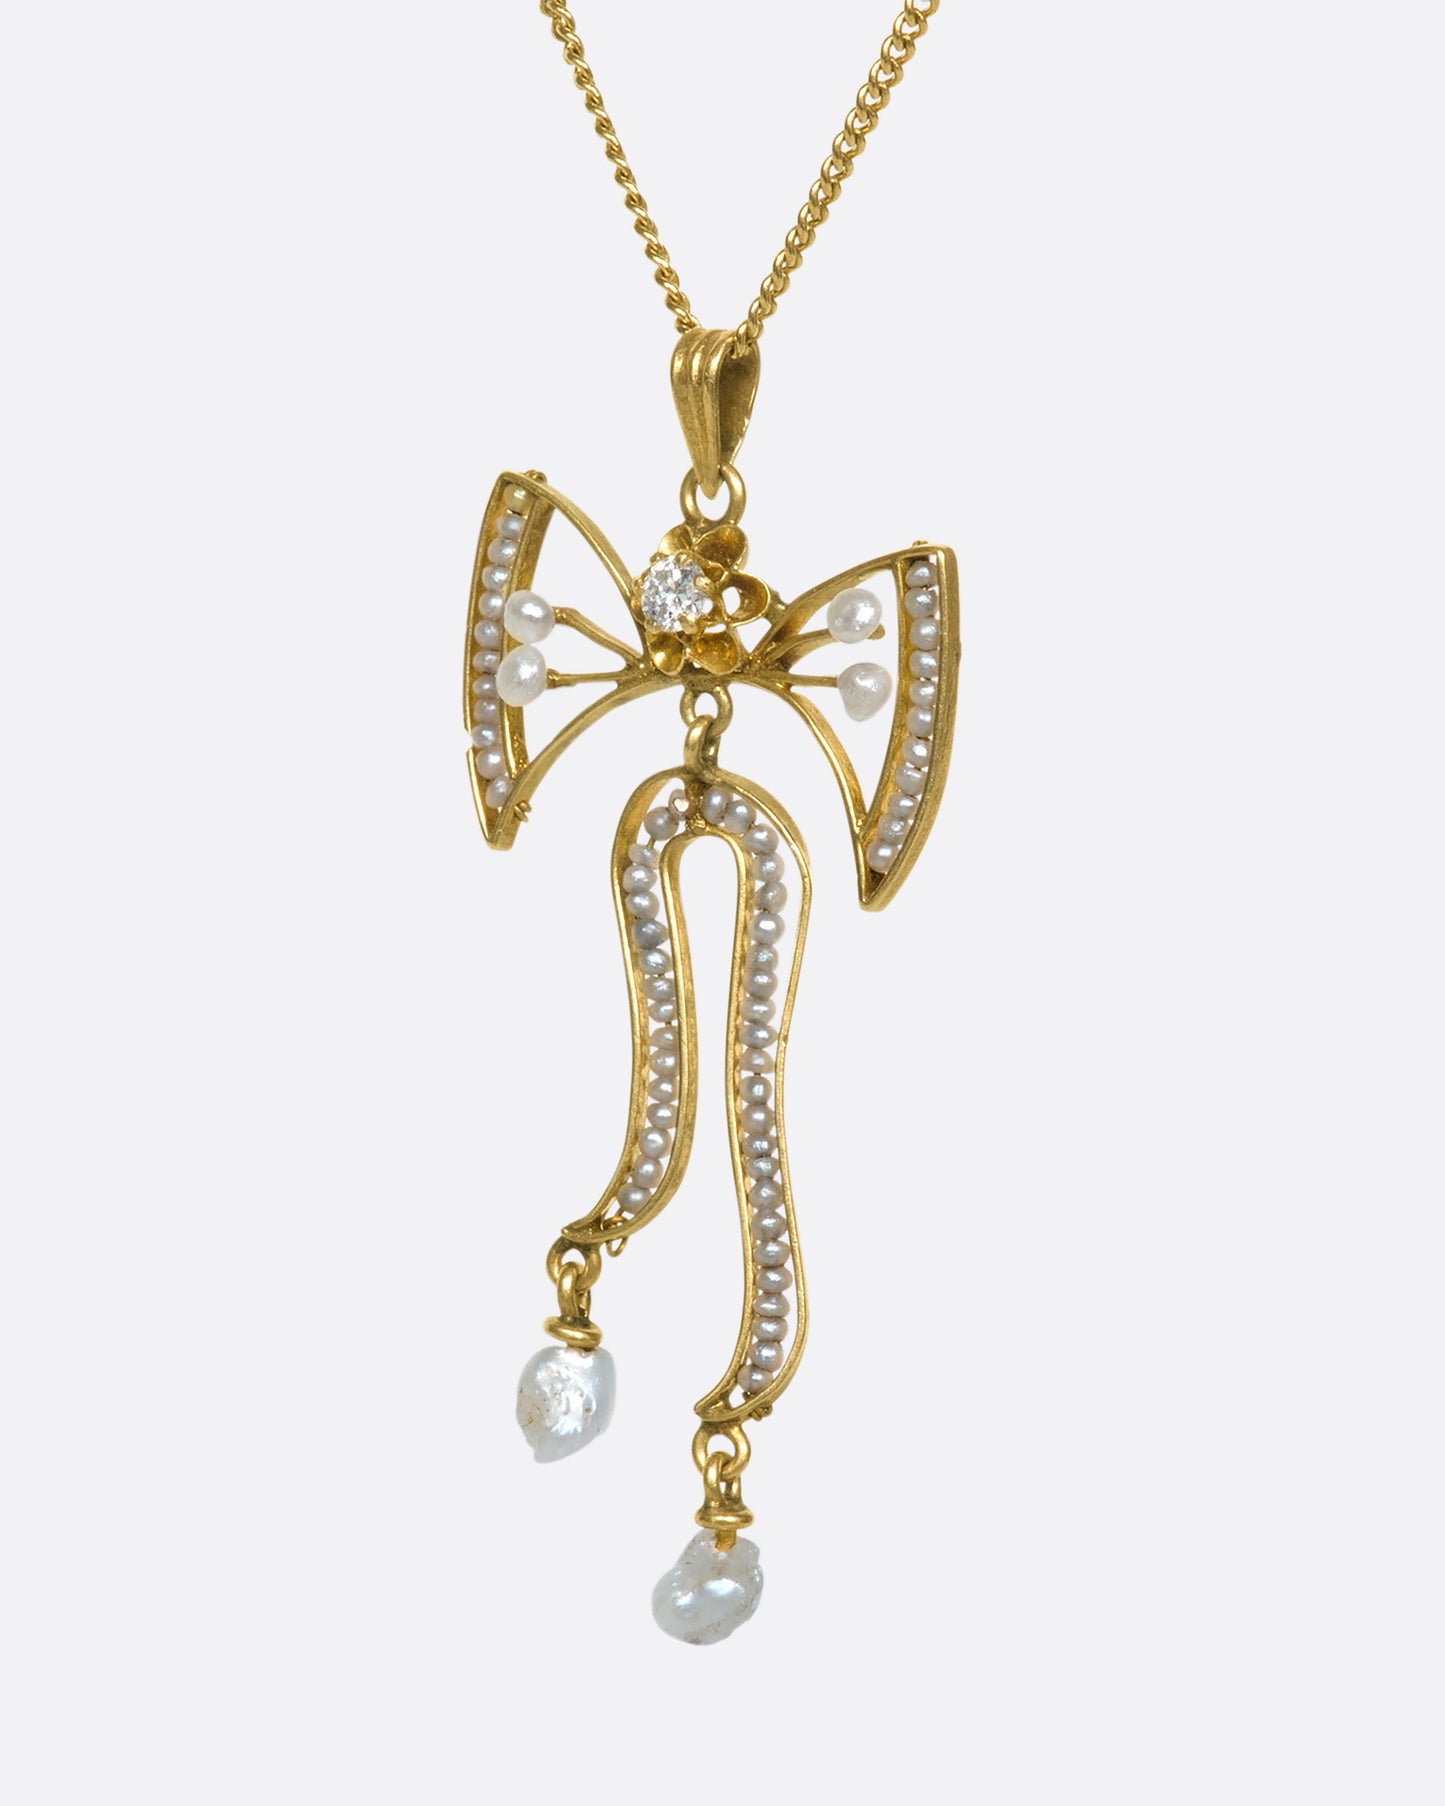 A slightly angled close up view of a yellow gold bow pendant with seed pearls and a diamond.